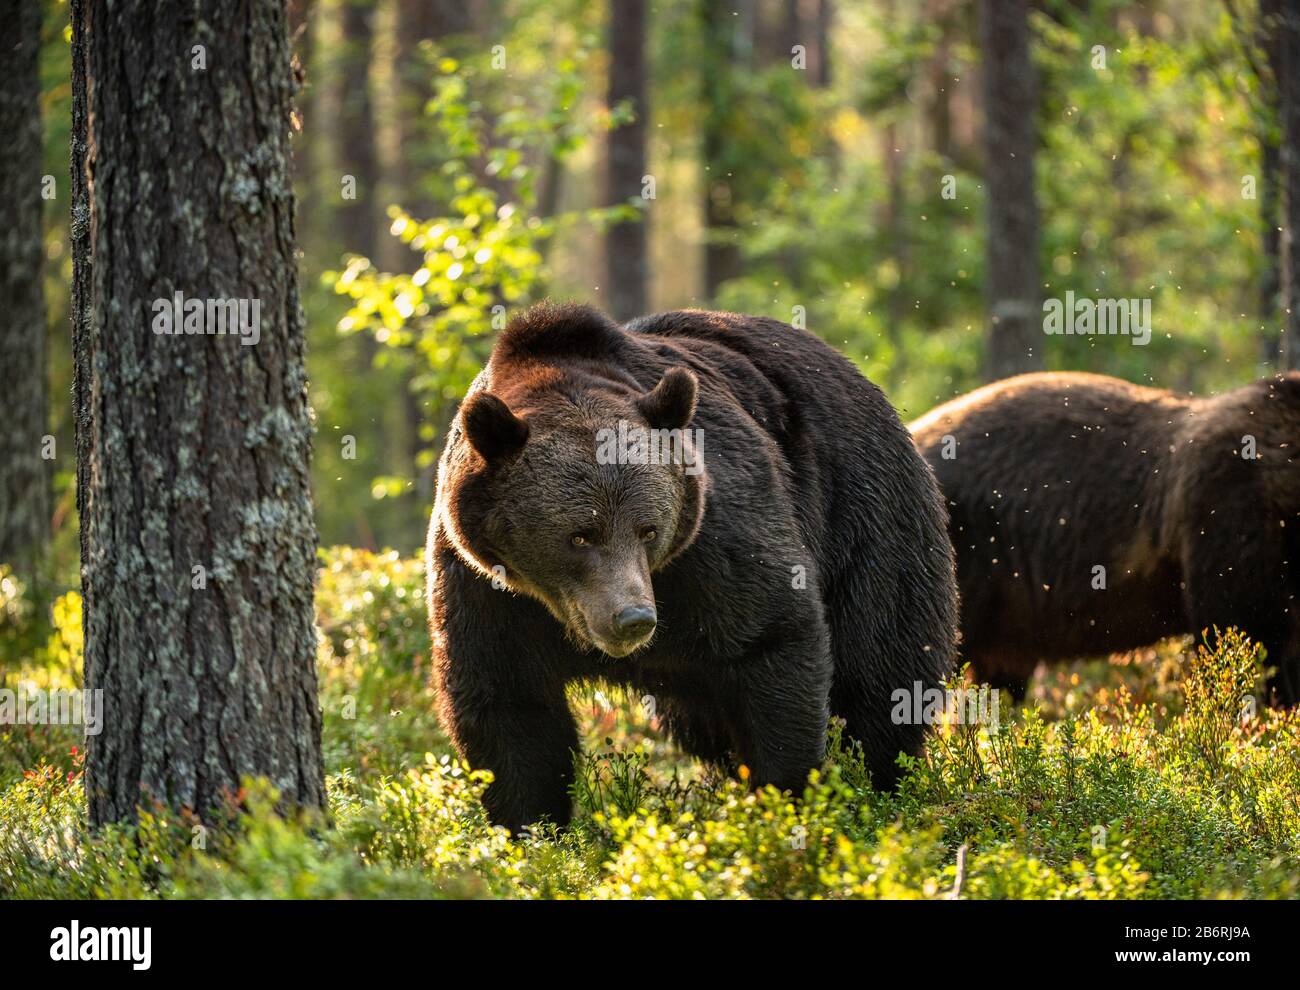 Big bear with backlit, forest in background. Adult Male of Brown bear in the summer forest. Scientific name: Ursus arctos. Natural habitat. Stock Photo